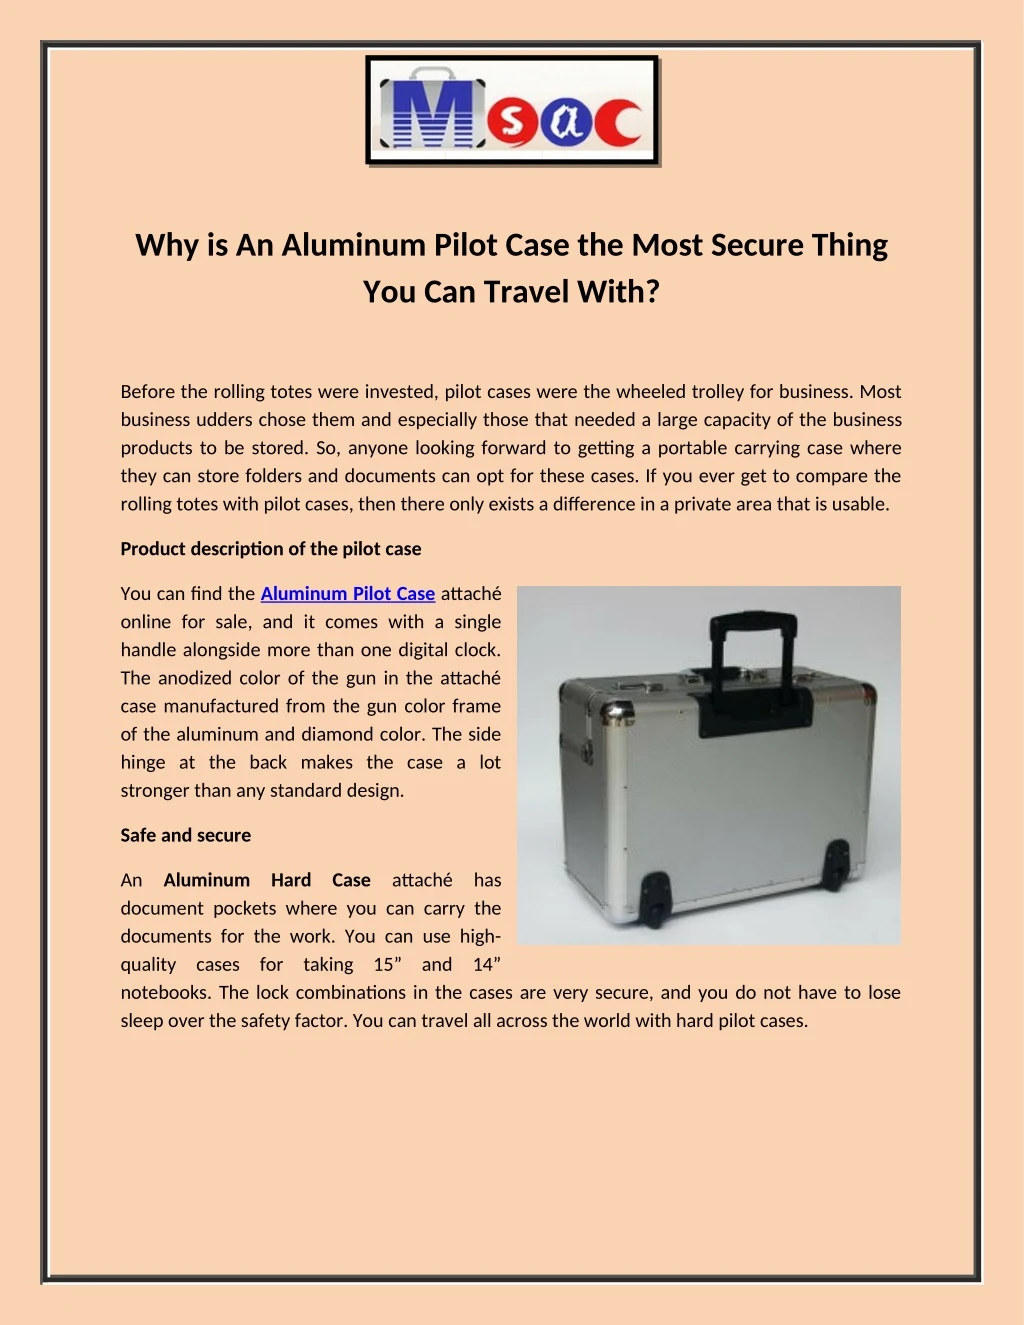 why is an aluminum pilot case the most secure